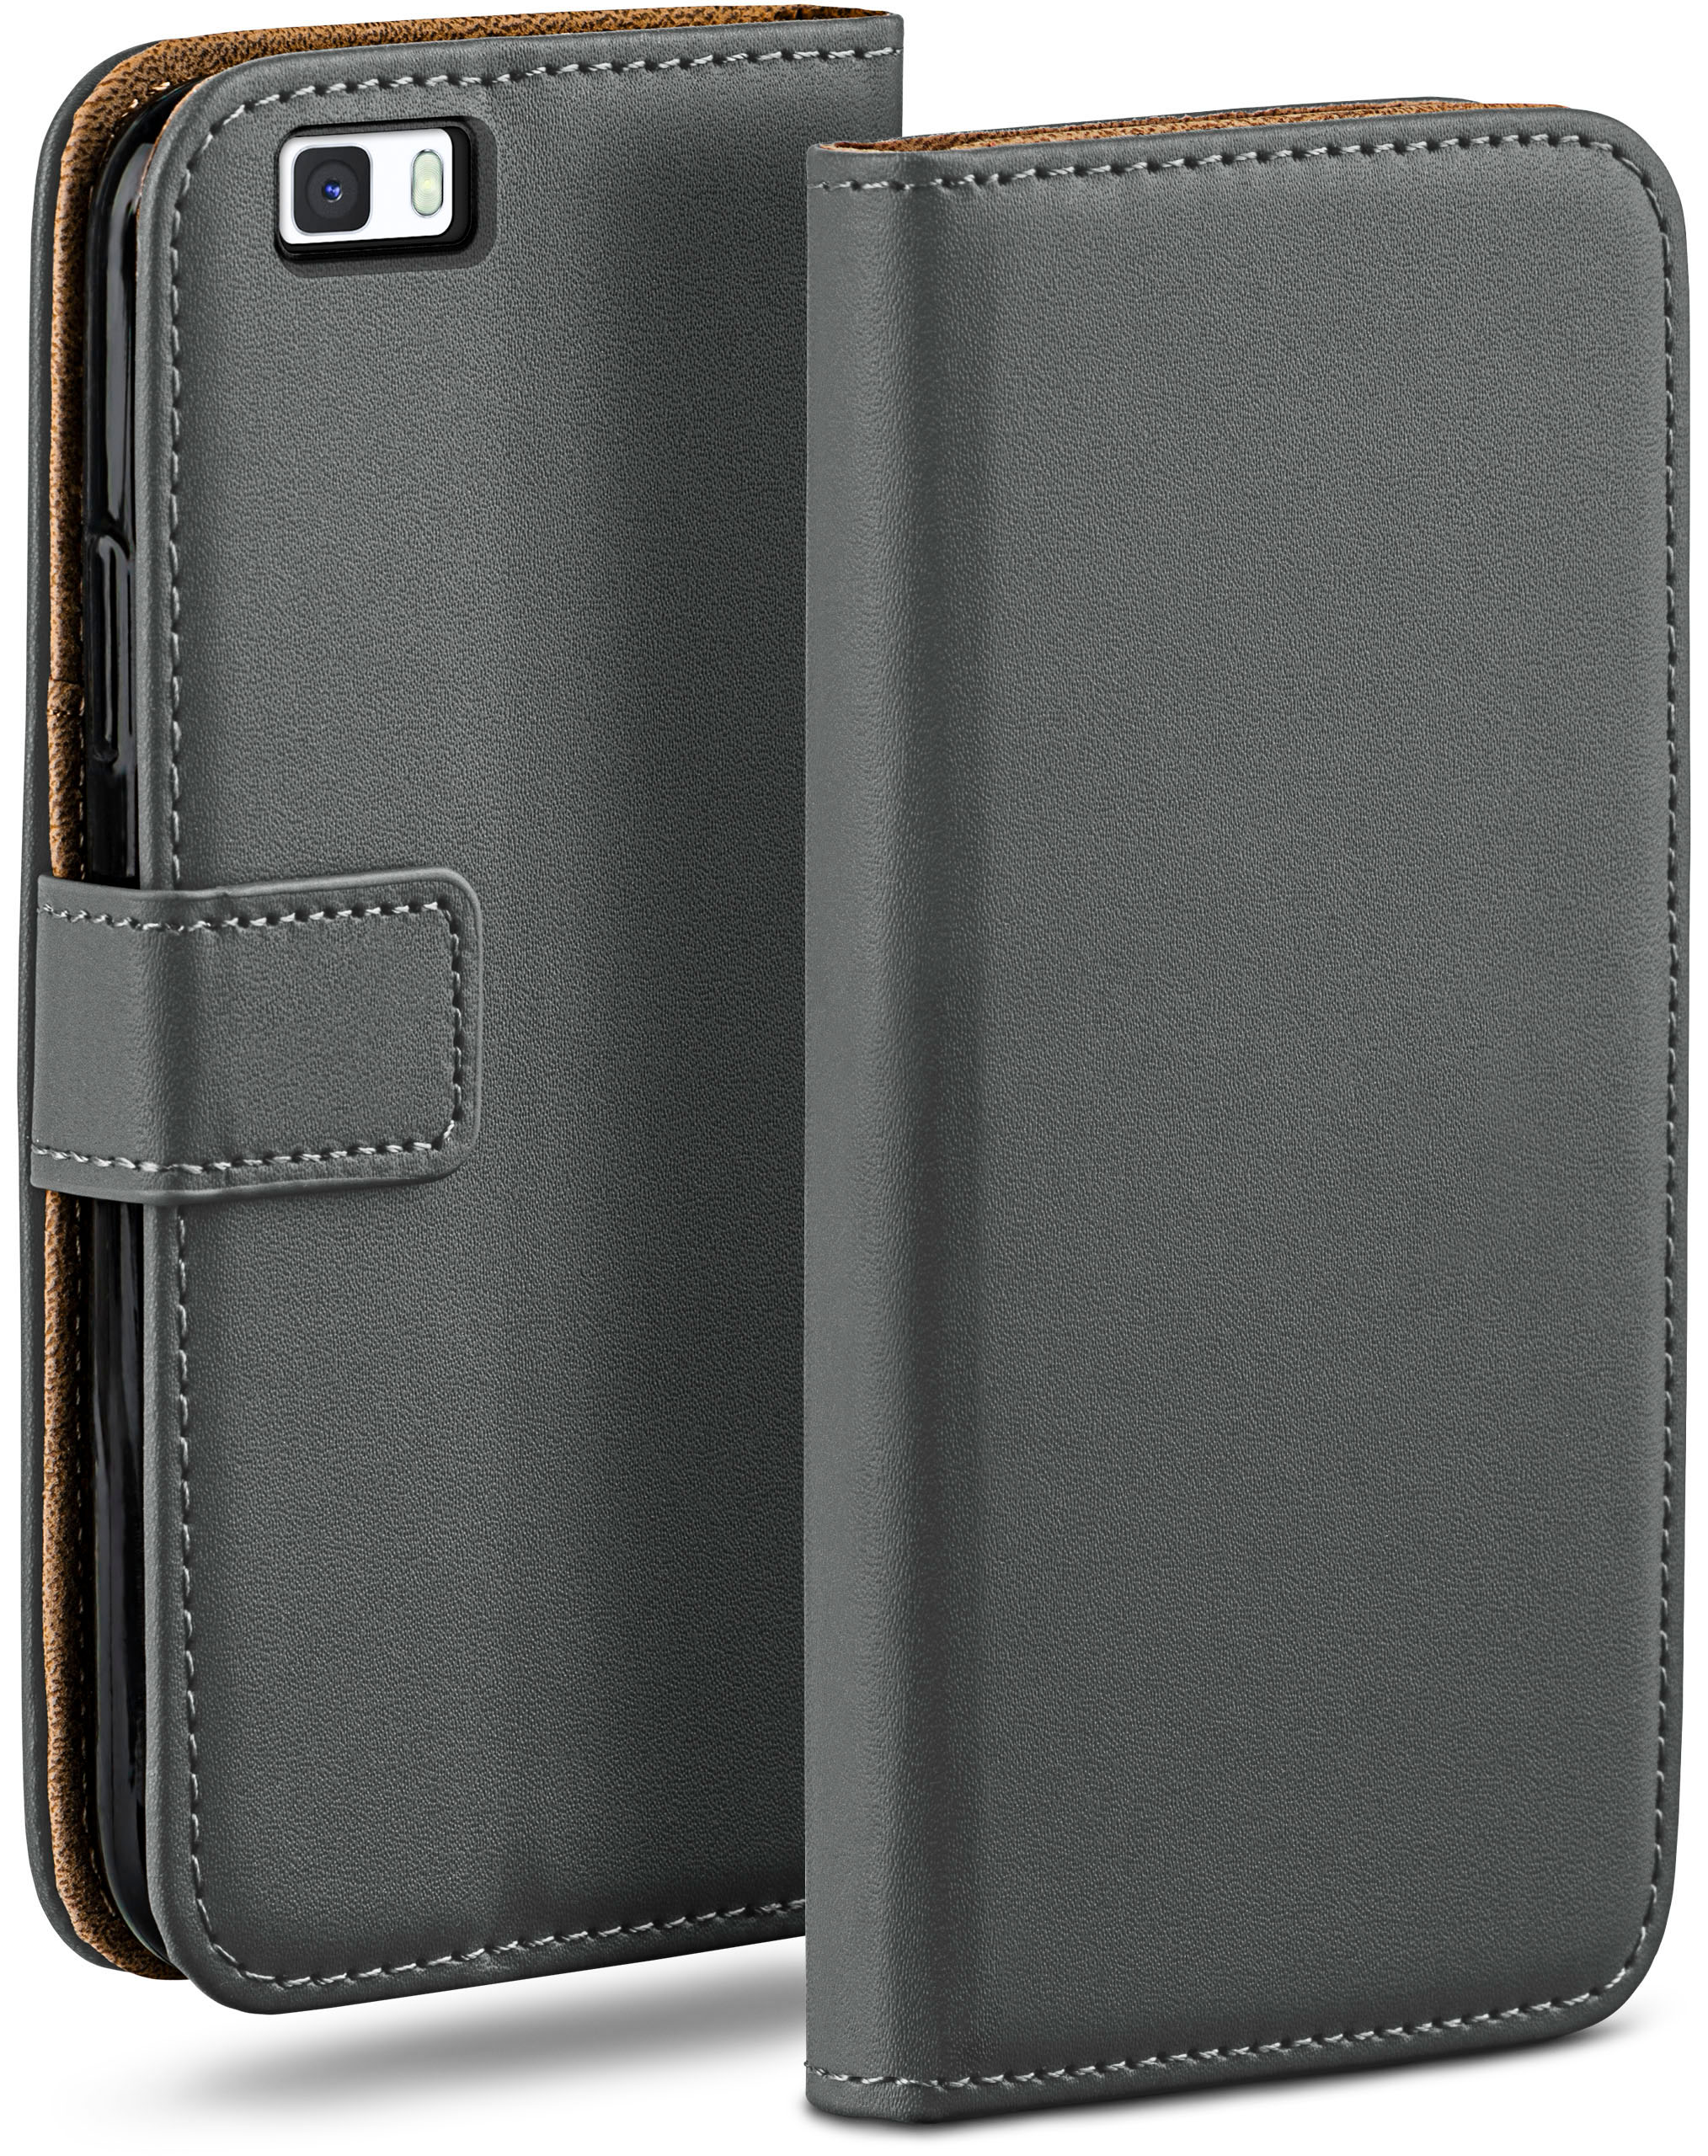 MOEX Case, Bookcover, 2015, Anthracite-Gray Lite Huawei, Book P8